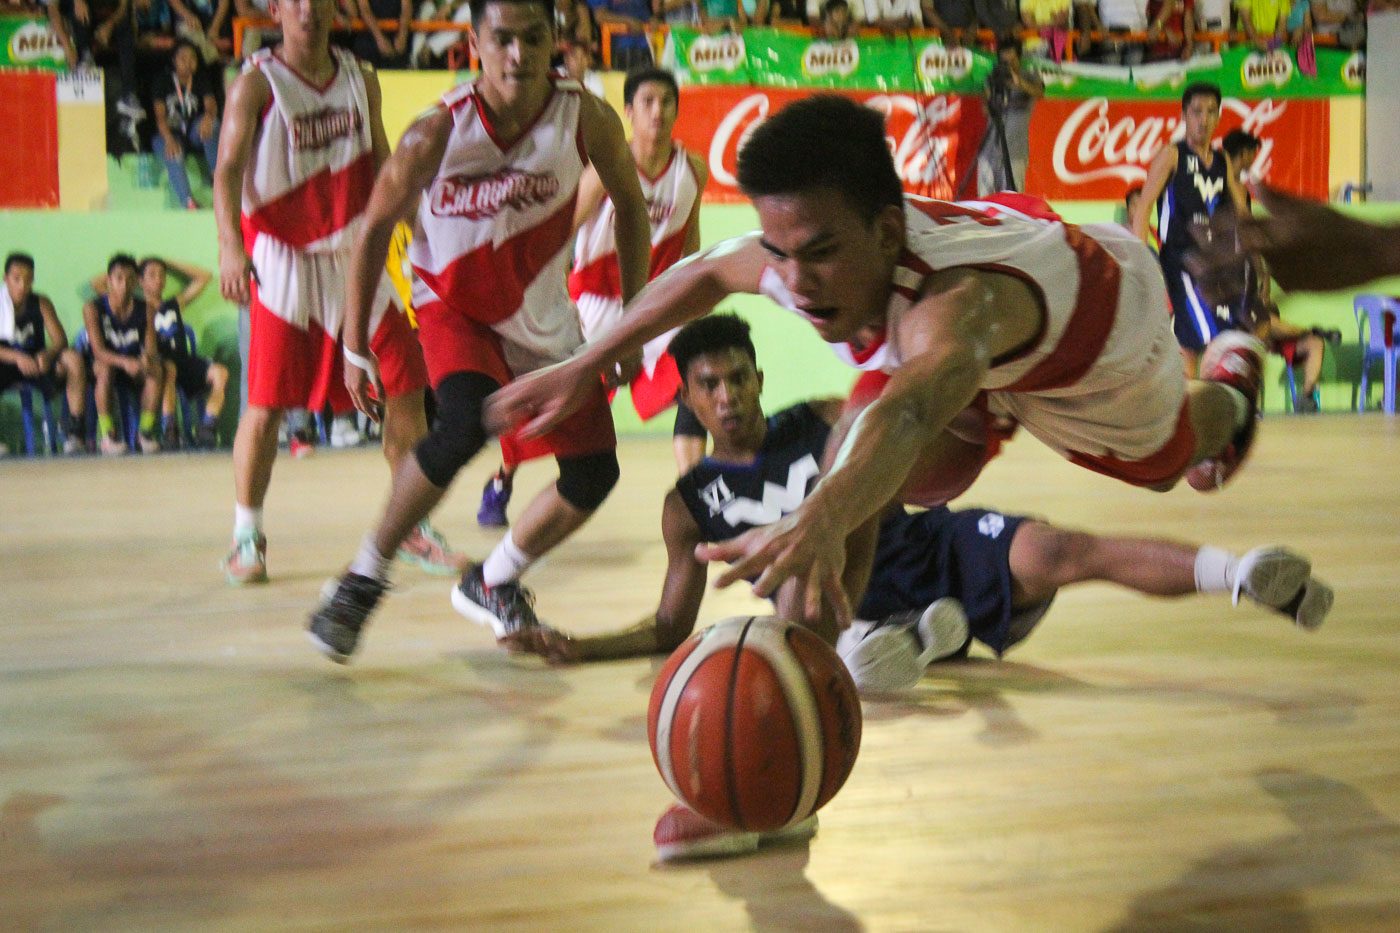 LOOSE BALL. A Calabarzon cager tries to grab a loose ball during the Basketball semifinals against Western Visayas. Photo by Joseph Victor Sumbong/Rappler   